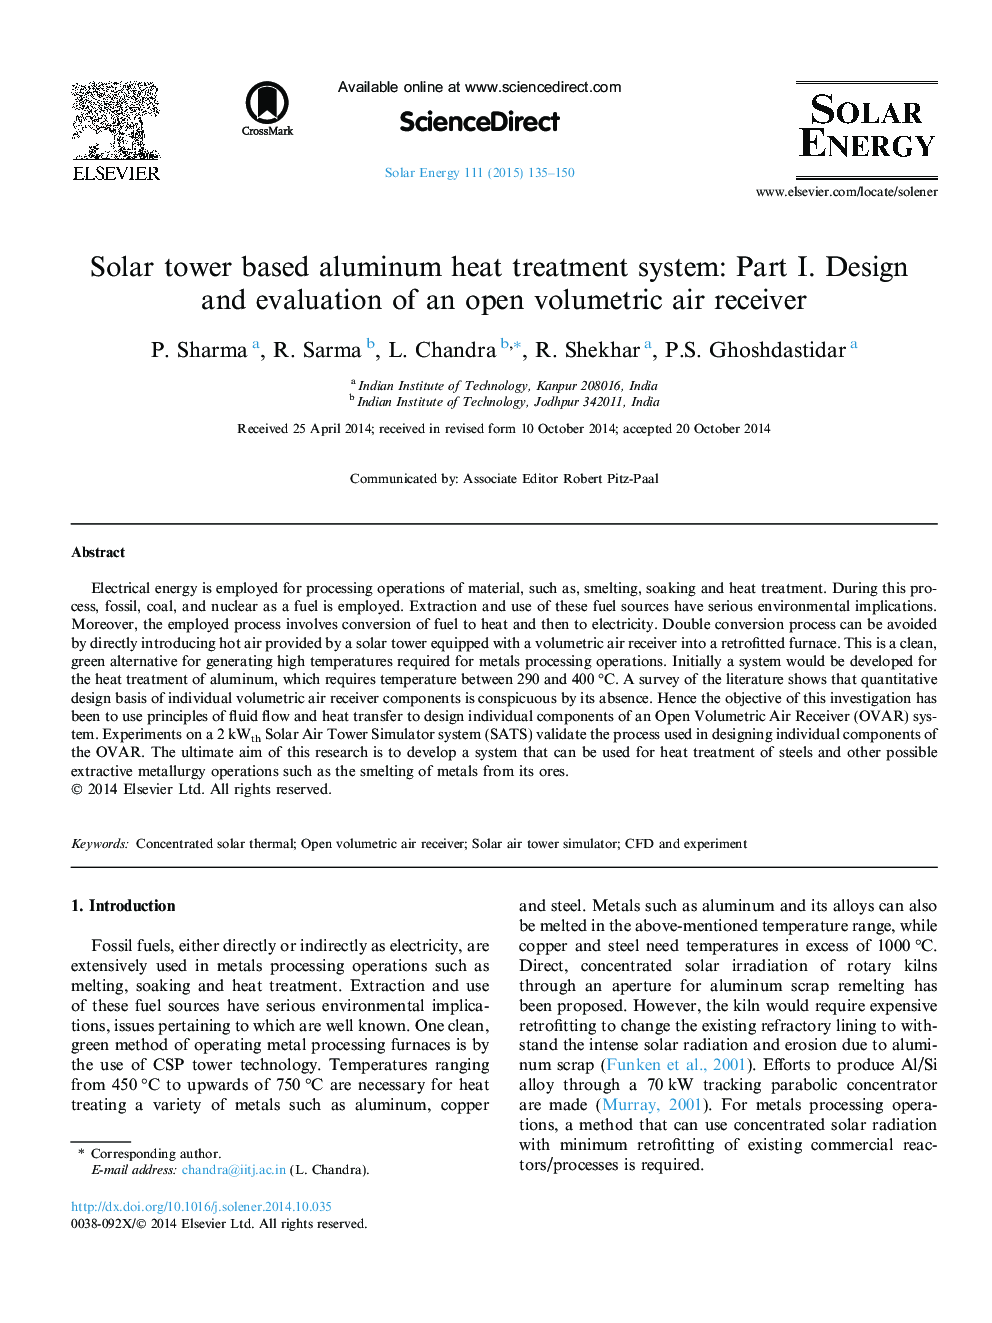 Solar tower based aluminum heat treatment system: Part I. Design and evaluation of an open volumetric air receiver